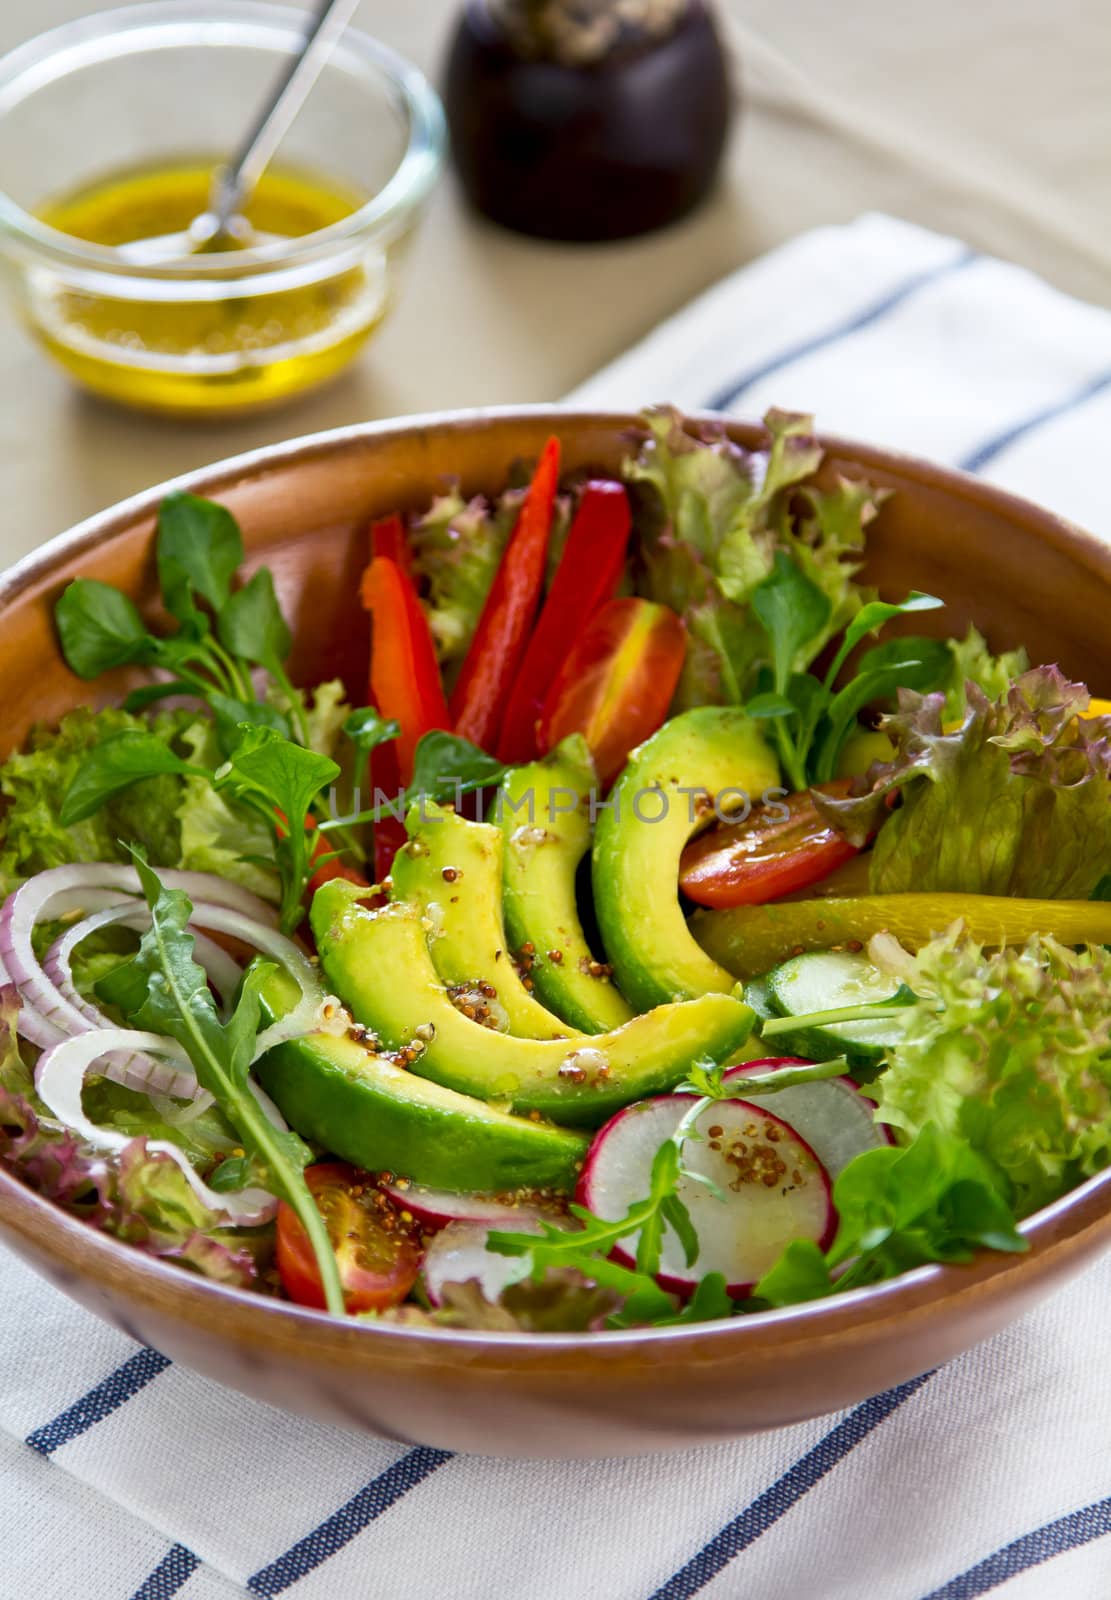 Avocado with pepper,radish and lettuce salad by vinaigrette